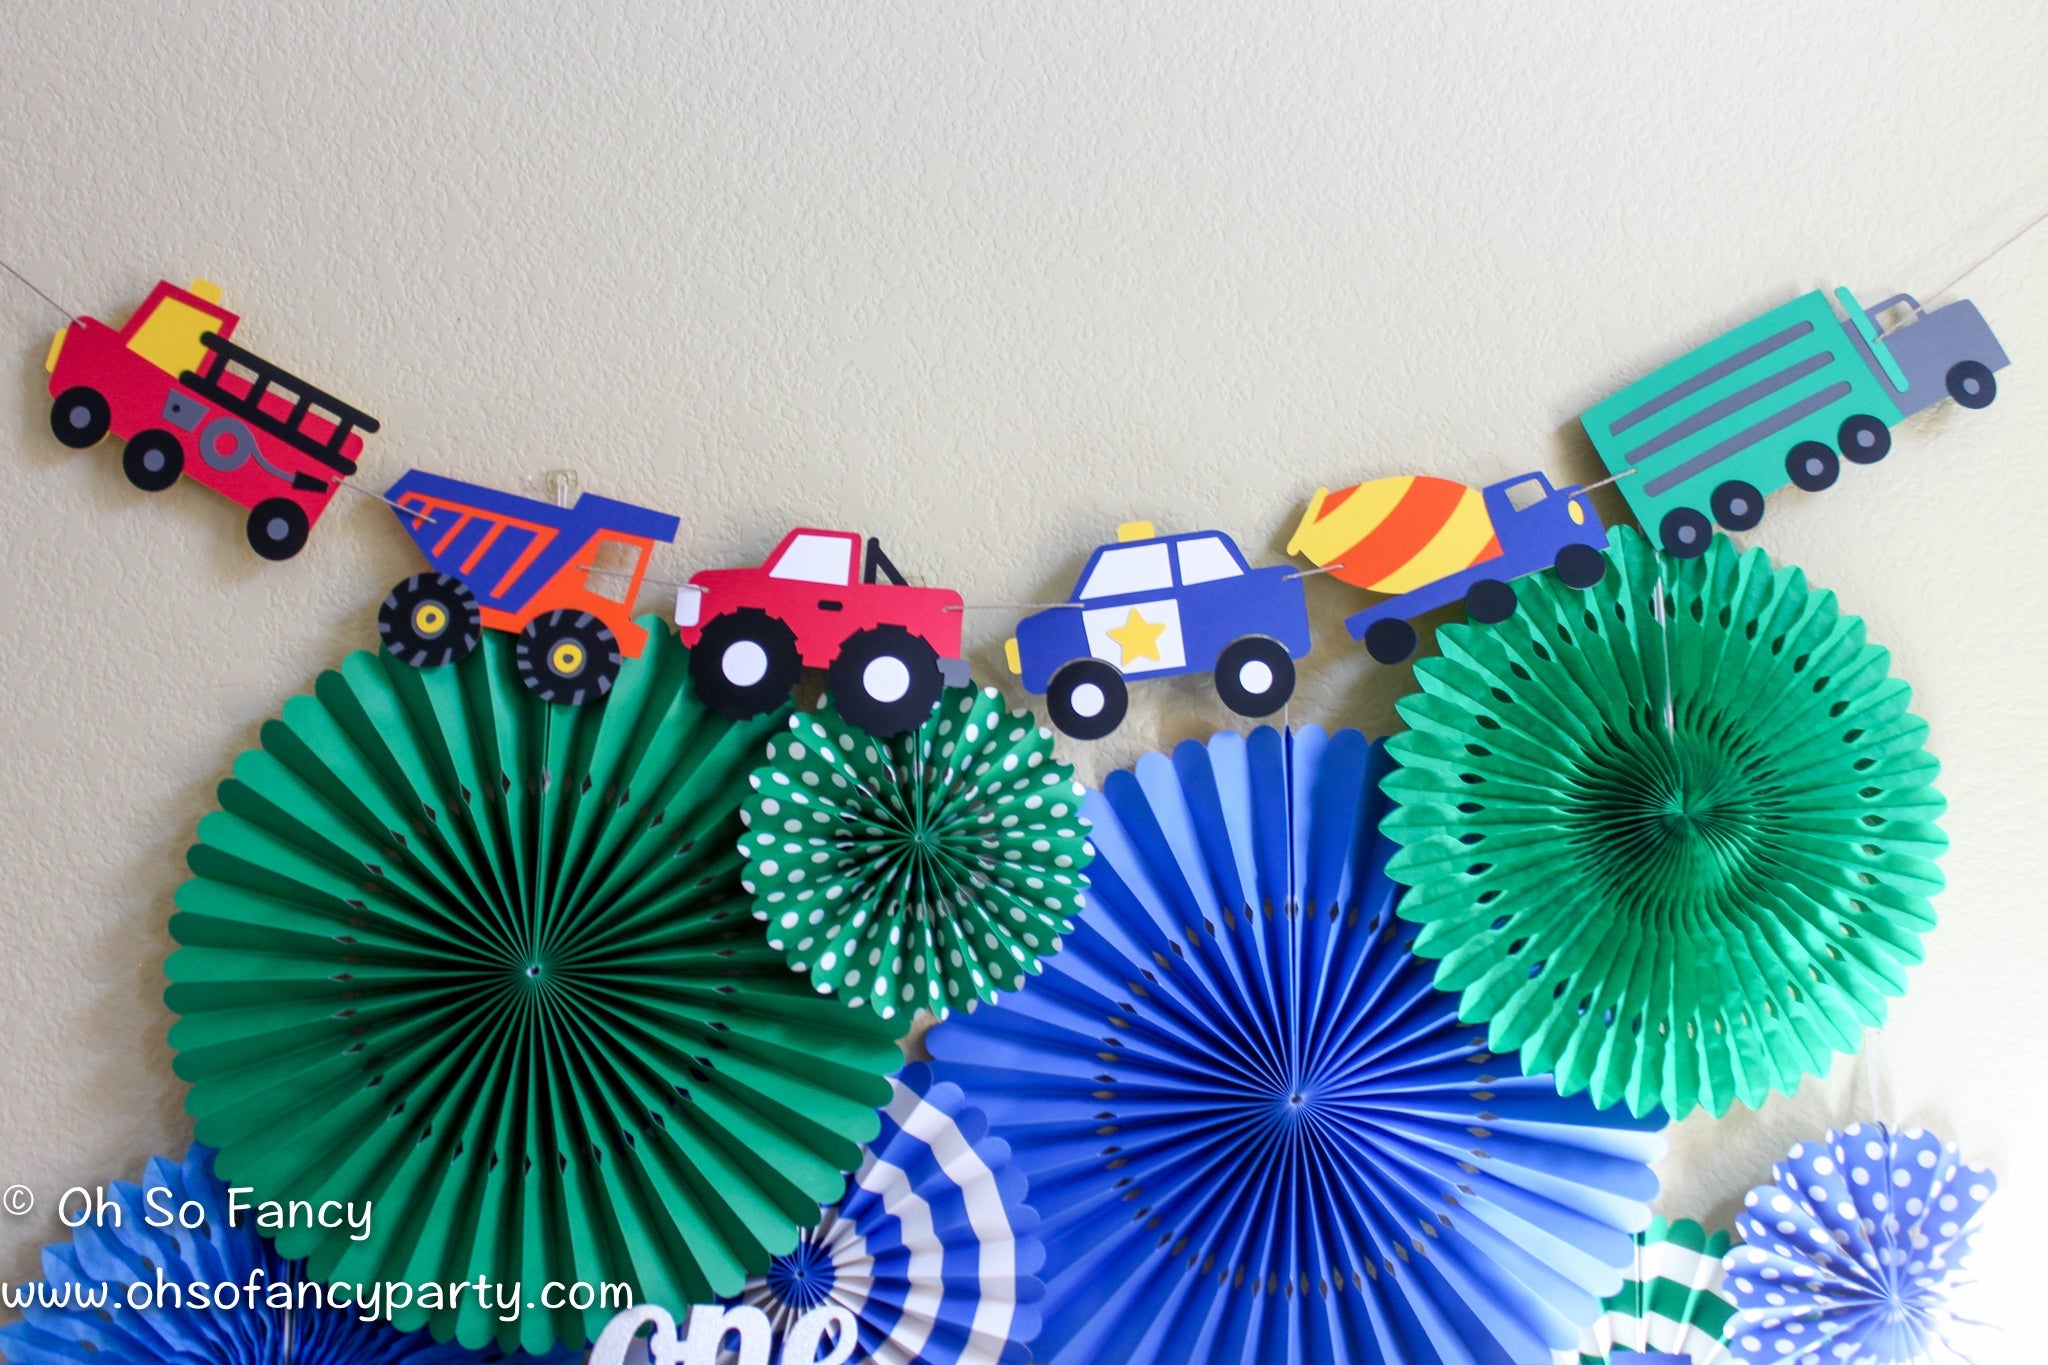 From birthday banners with trucks and race cars, to centerpieces and cupcake toppers to complete your table design, Oh So Fancy Party has it here for you.